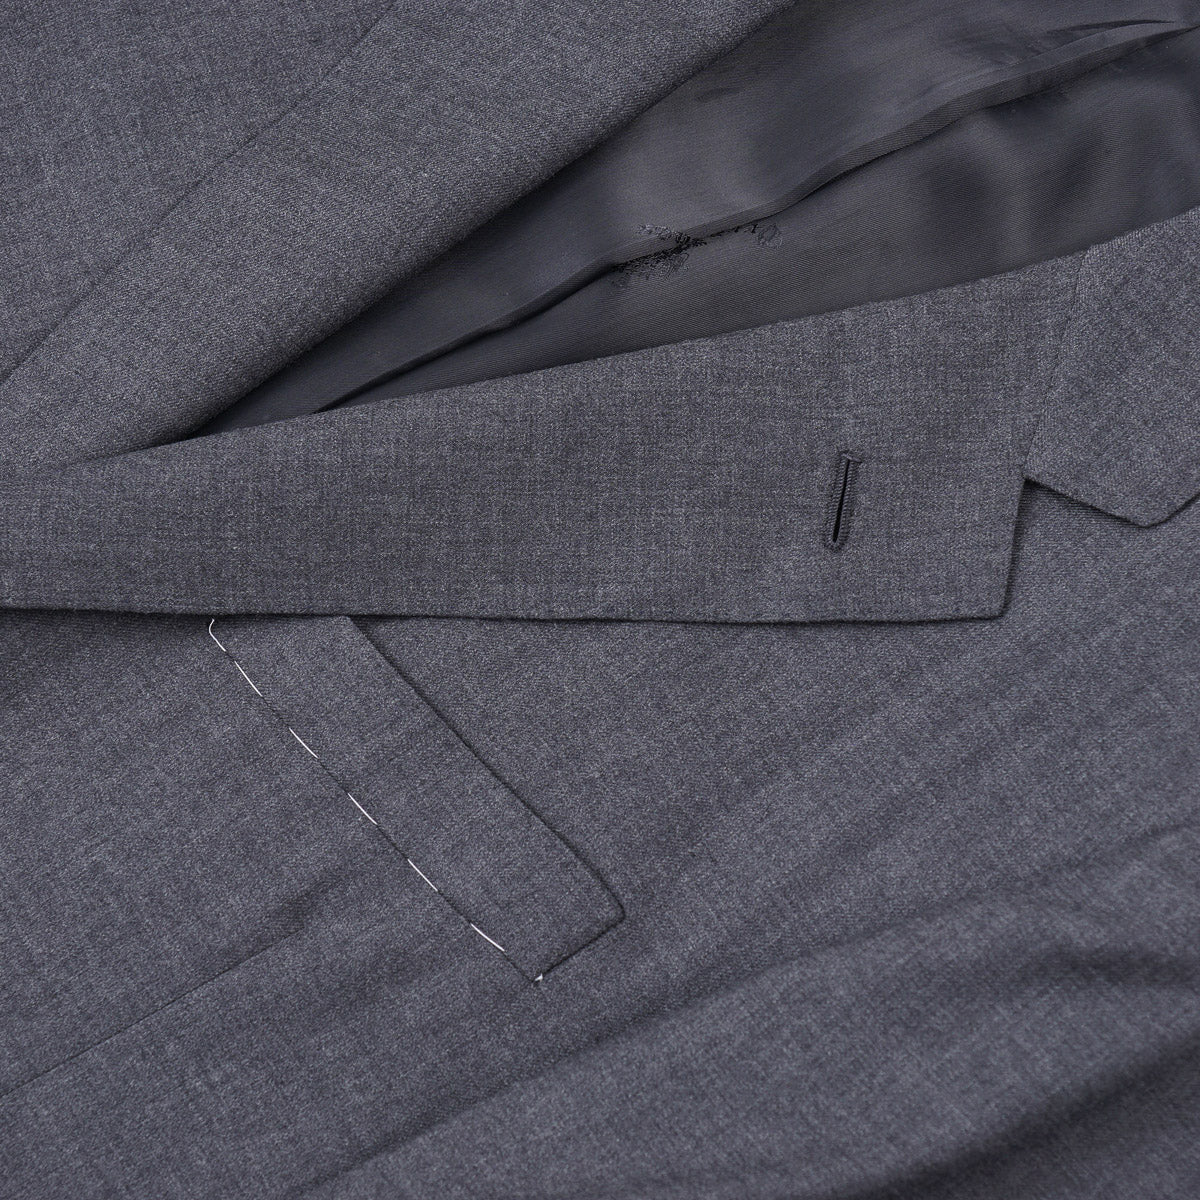 Oxxford 'Archer' Gray 140s Wool Suit - Top Shelf Apparel